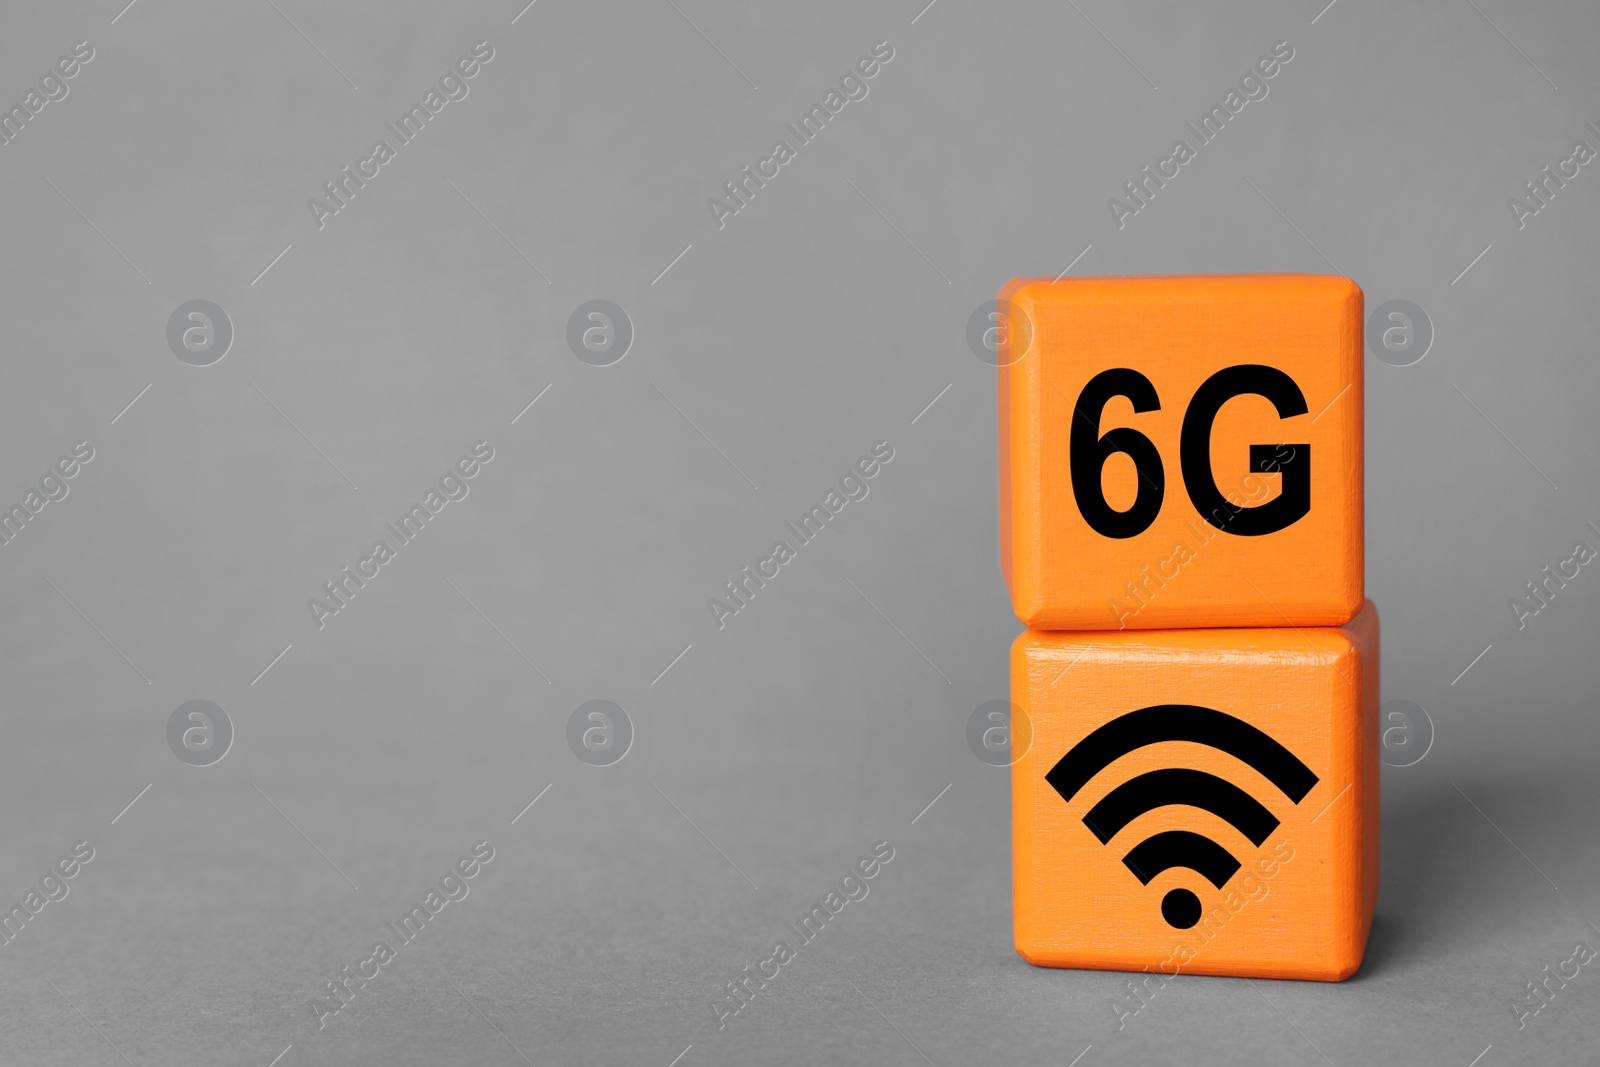 Photo of 6G technology, Internet concept. Orange wooden cubes on light grey background, space for text